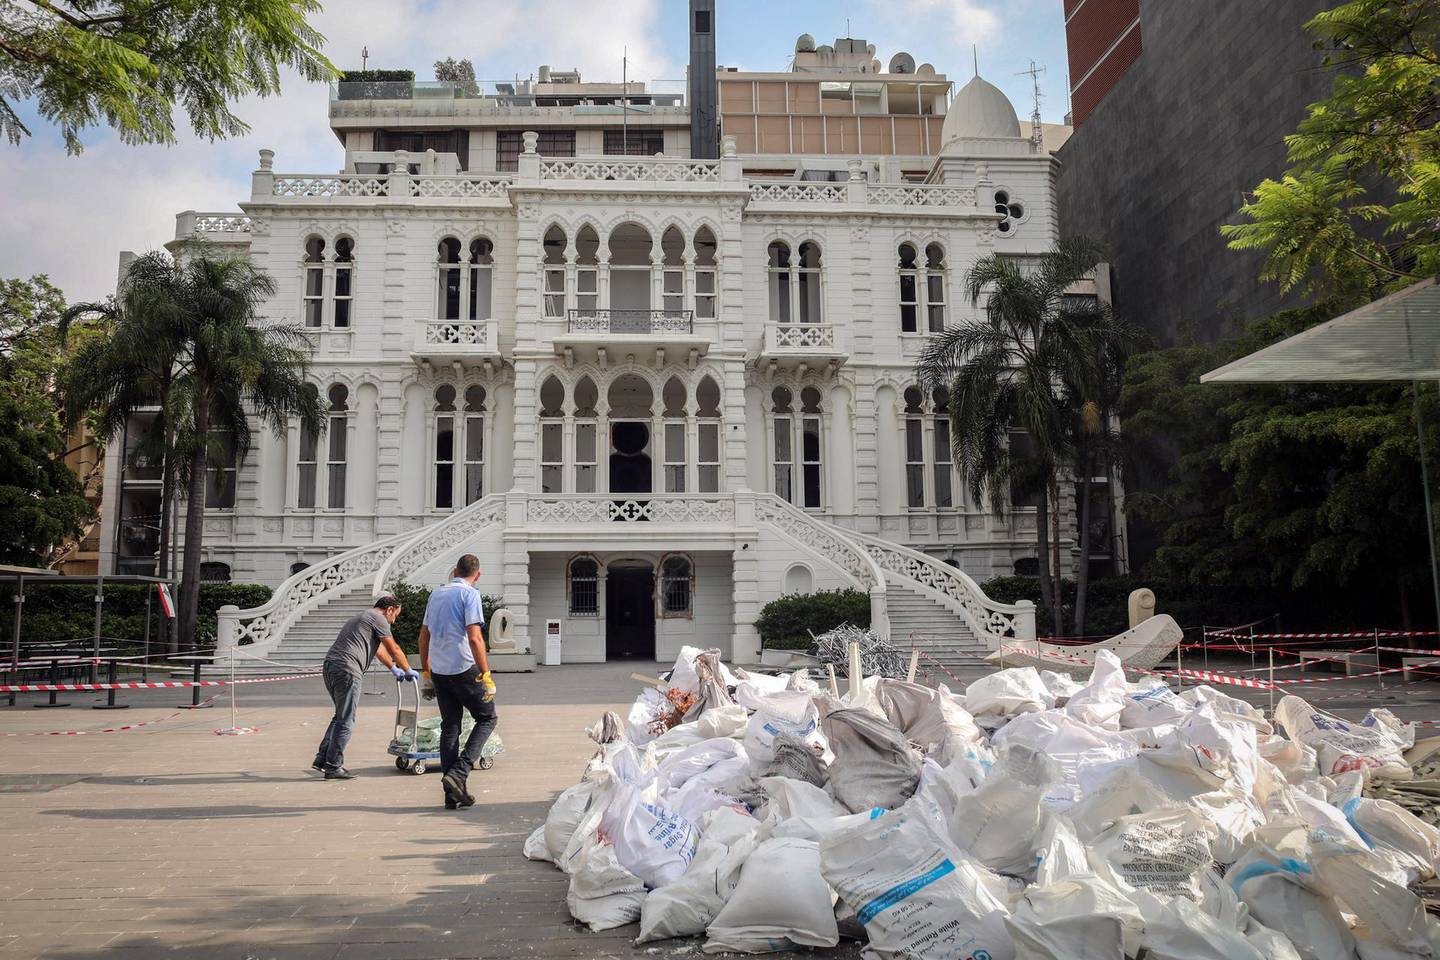 Workers transport bags of rubble outside the Nicolas Ibrahim Sursock Museum in Beirut, Lebanon, on Wednesday, Aug. 12, 2020. Lebanon was already coming apart at the seams before a 2,750-ton cache of ammonium nitrate detonated at the Port of Beirut, killing at least 171 people and wounding thousands. Photographer: Hasan Shaaban/Bloomberg